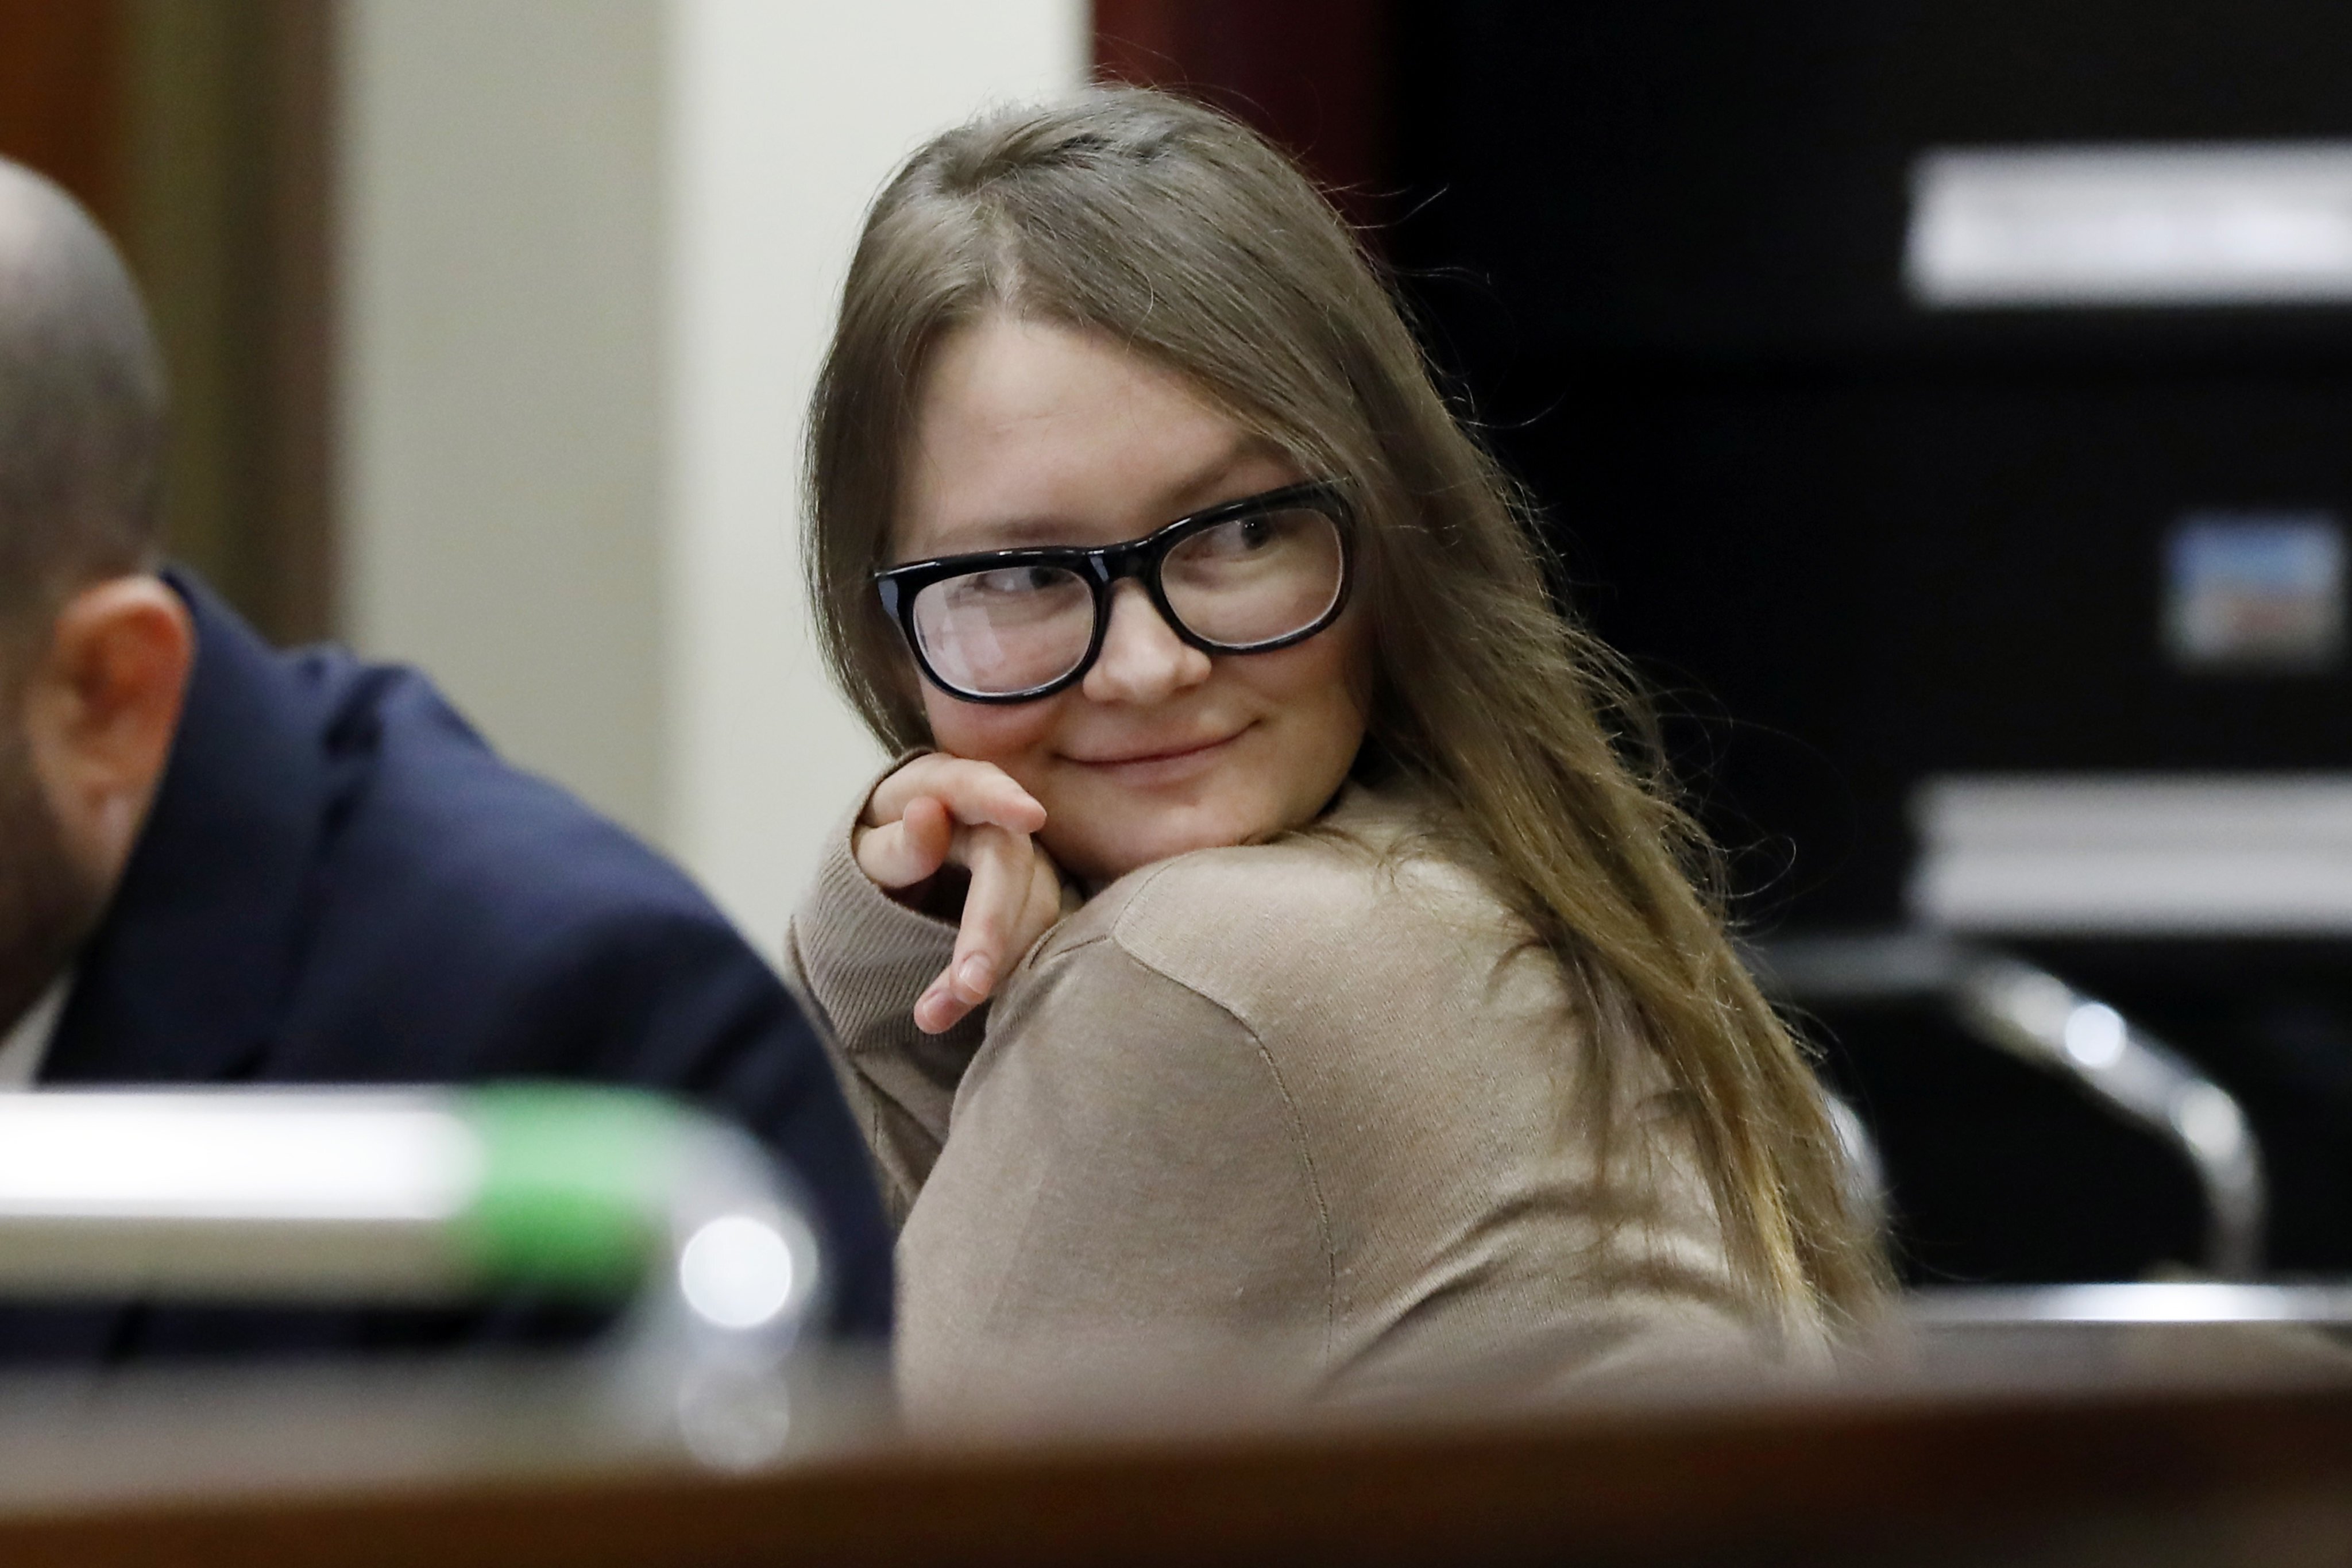 Anna Sorokin sits at the defense table in New York State Supreme Court, in New York, Wednesday, March 27, 2019. Sorokin, who claimed to be a German heiress, is on trial on grand larceny and theft of services charges. (AP Photo/Richard Drew)